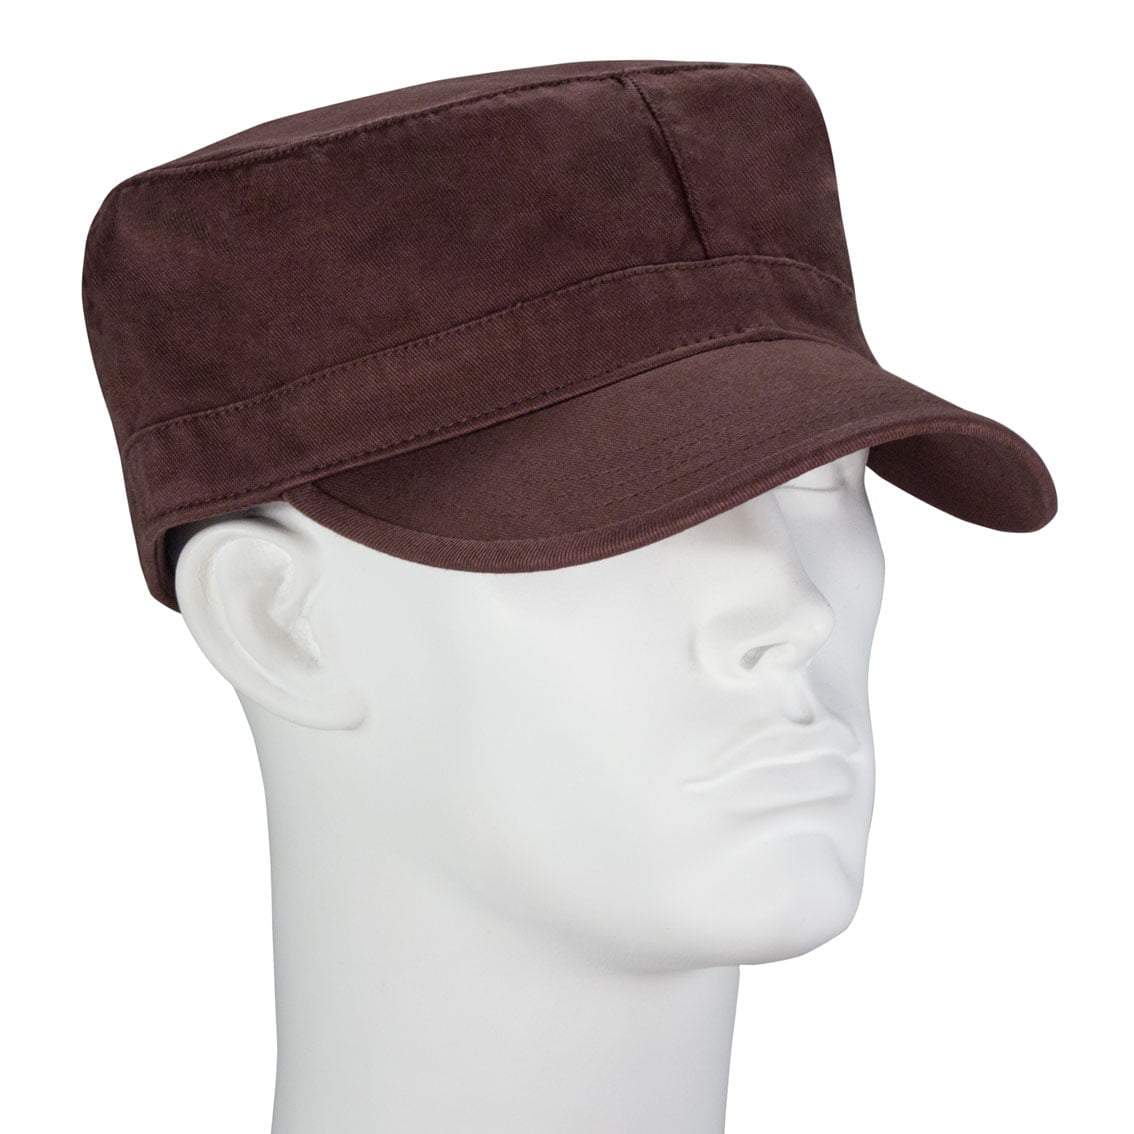 1pc Brown Plain Castro Military Fatigue Army Hat - Fitted - Unconstructed - 100% Cotton